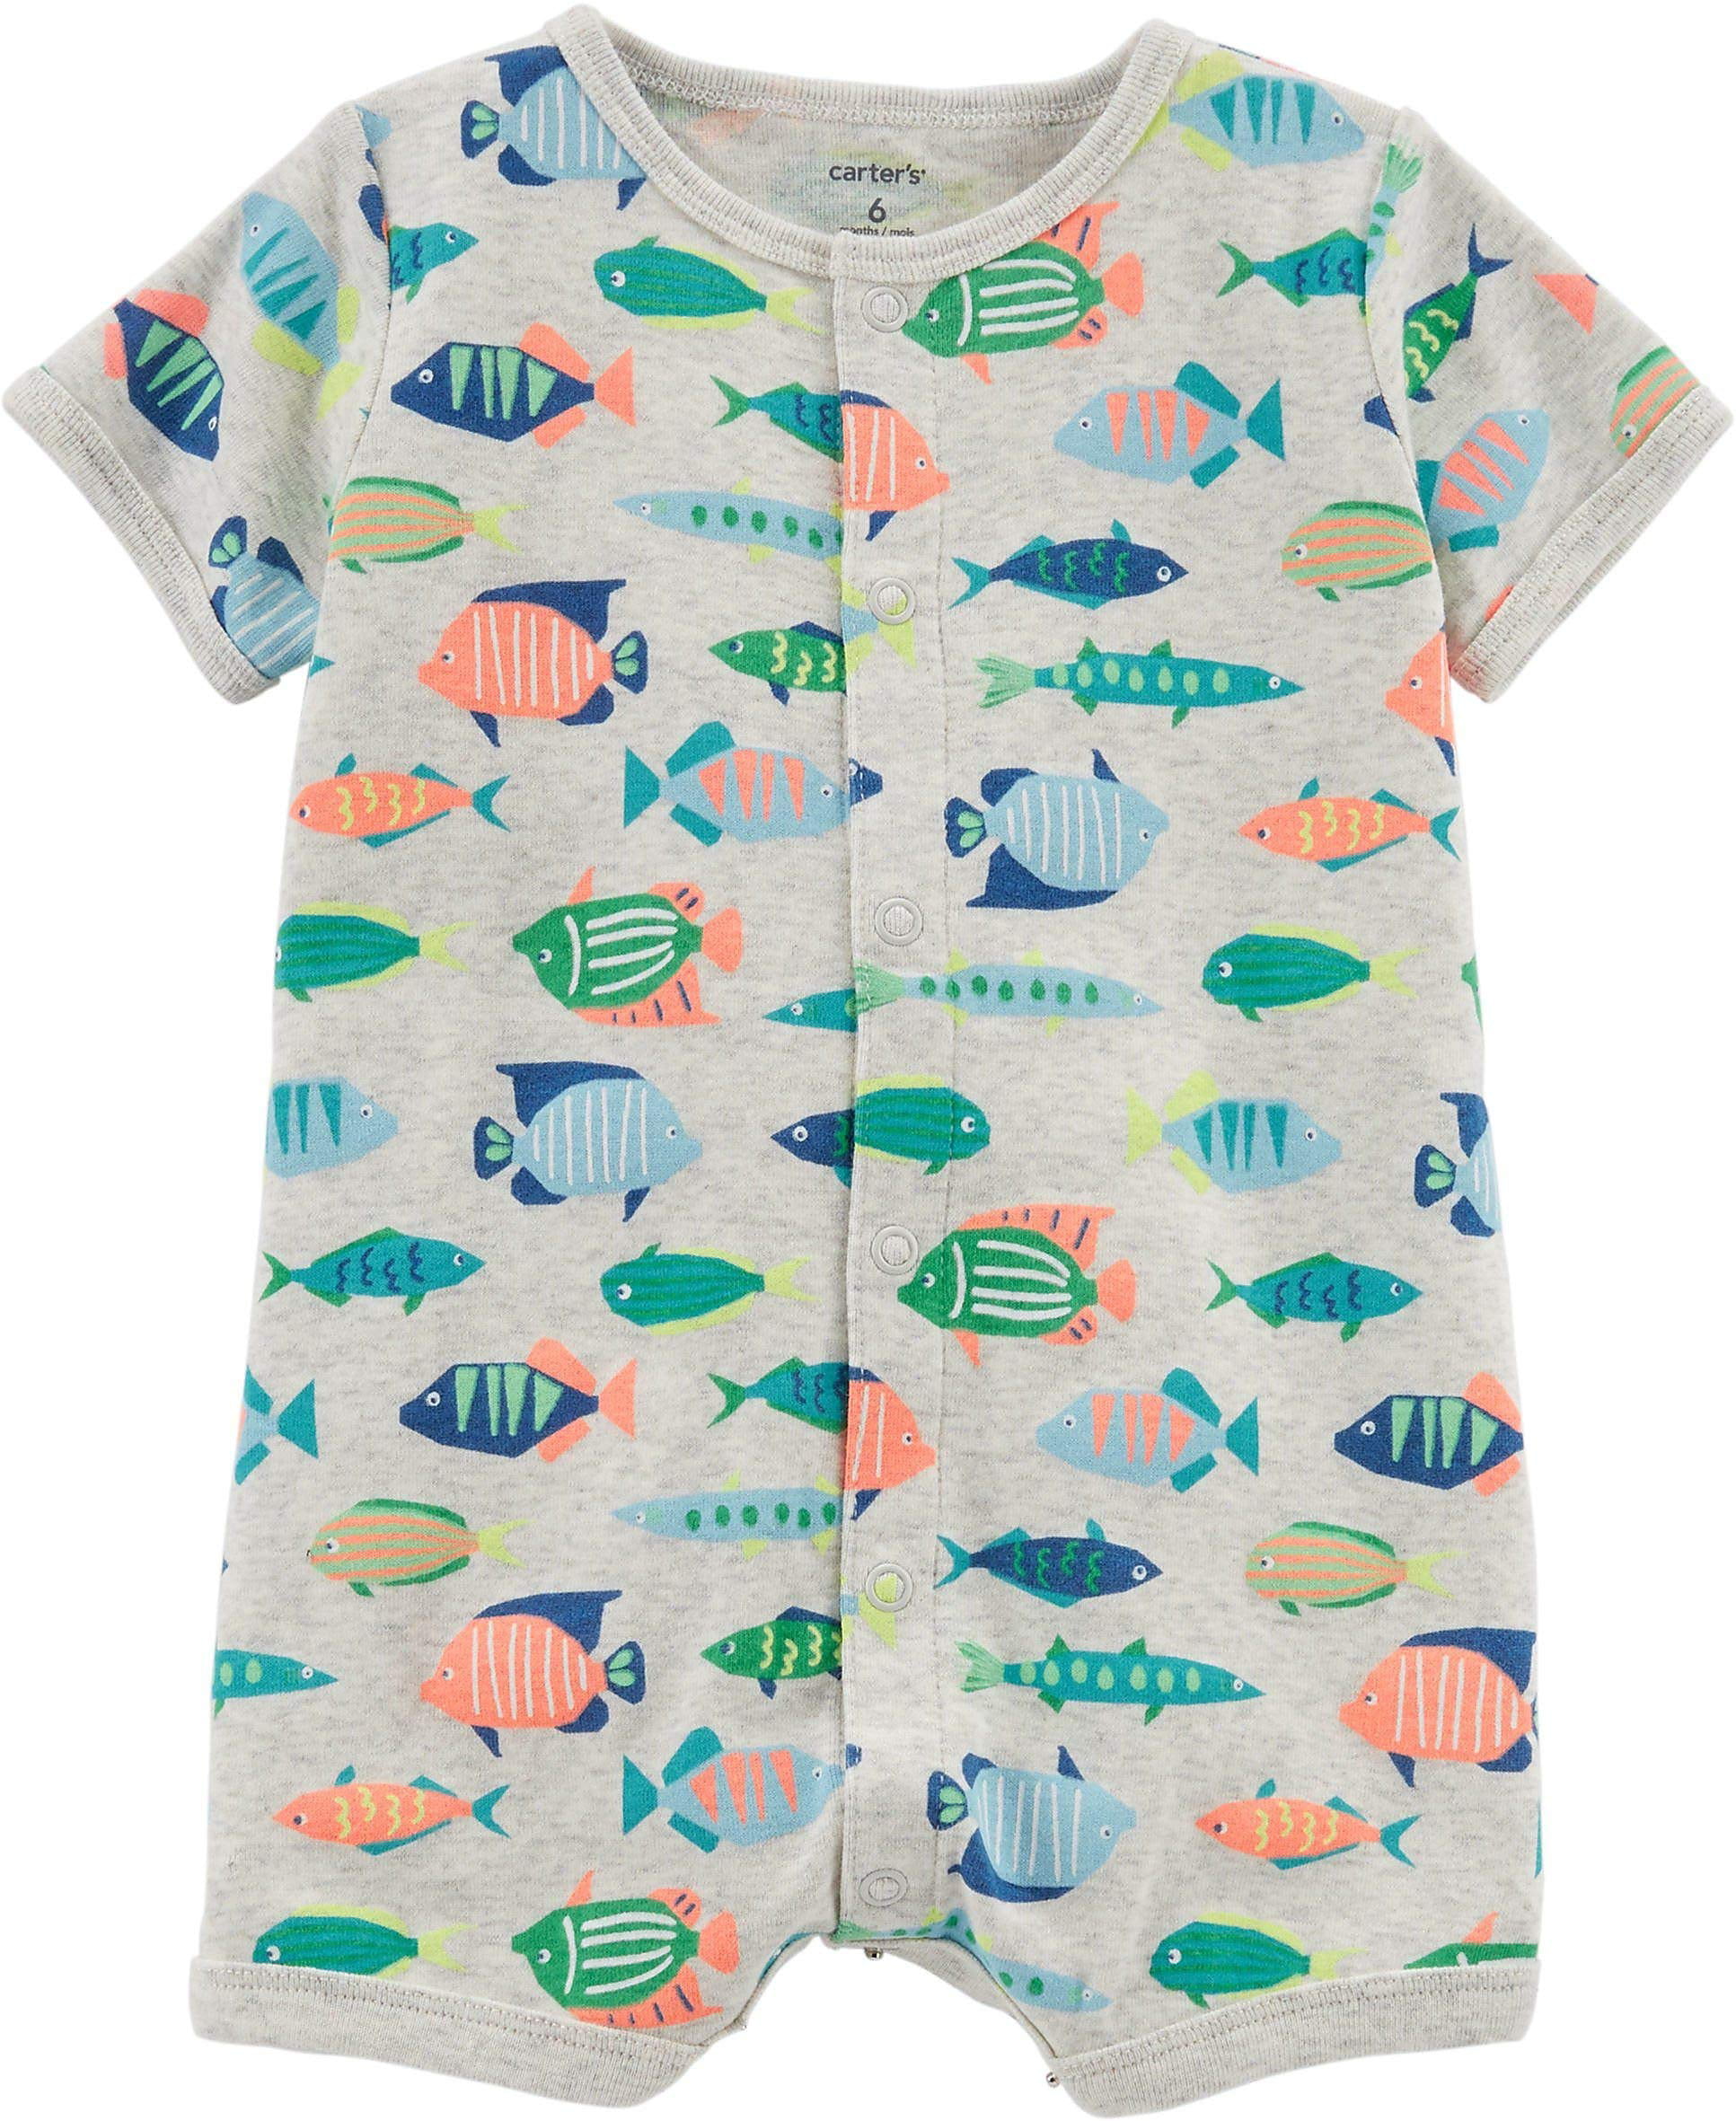 NWT Carter's Baby Boy Blue Shark Fish Snap-Up Romper Size 3 6 9 12 18 24 Months 